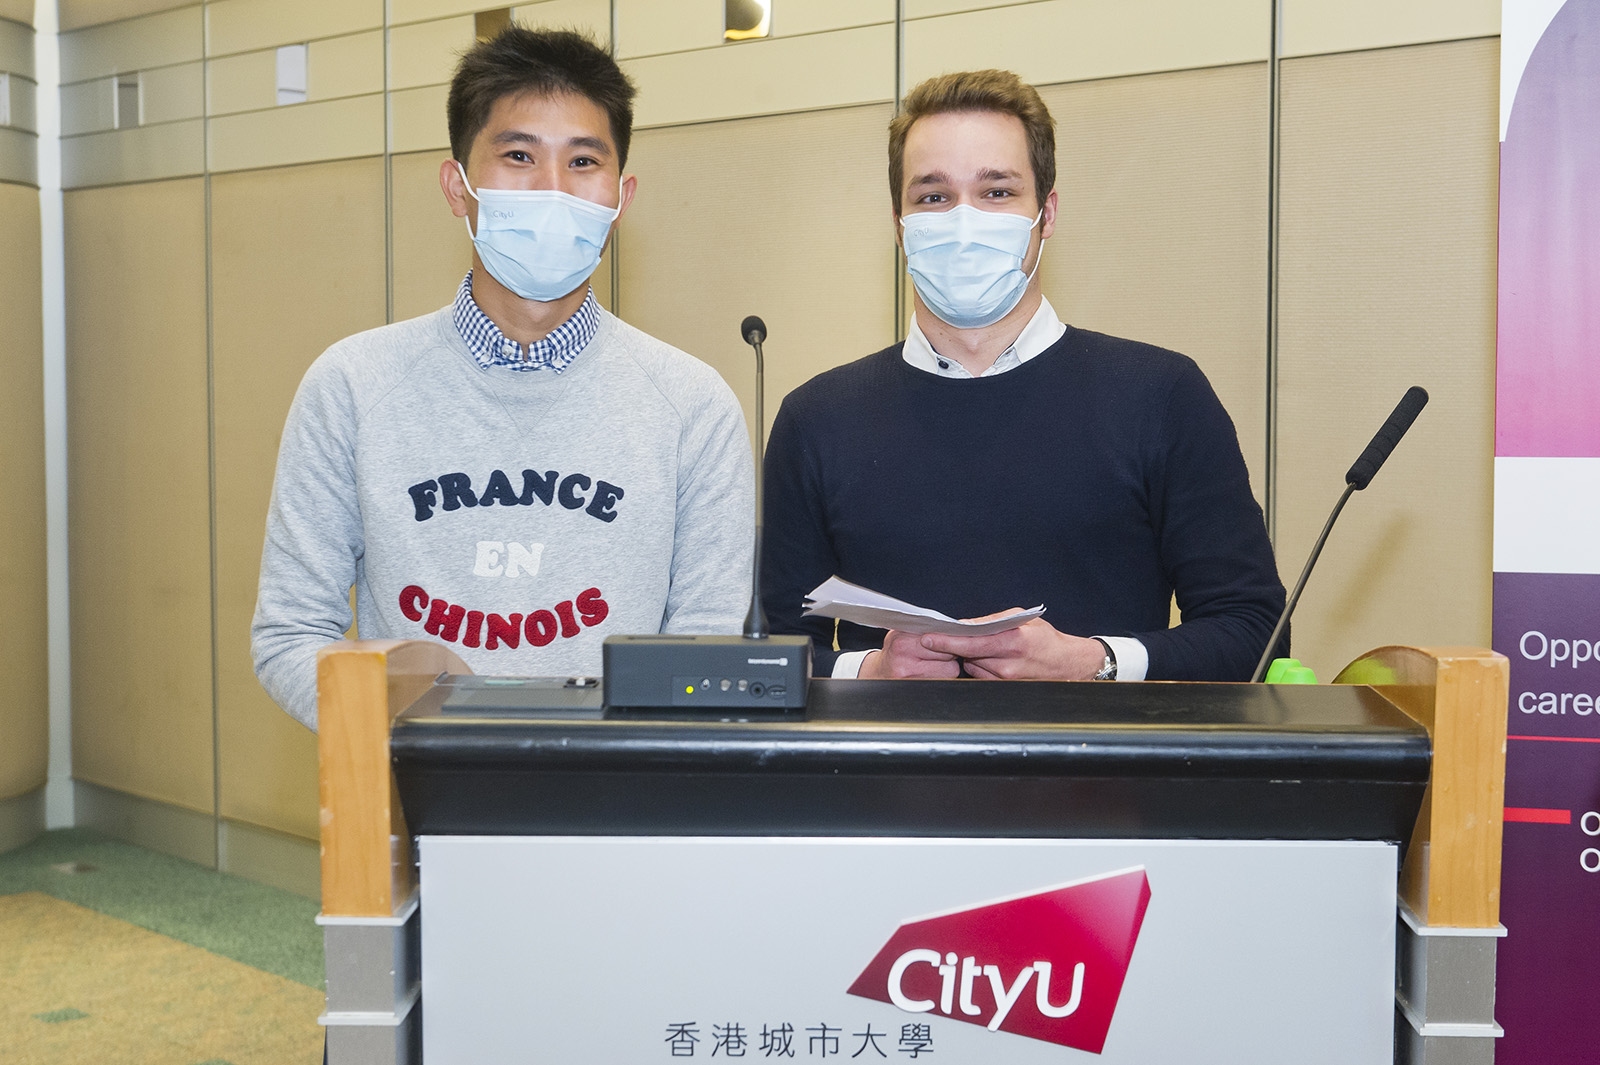 The MCs for the event, Valentin Larose and Pascal Chen both agree that Hong Kong seems far busier than France but  students from CityU would appreciate the different pace of life in France. 